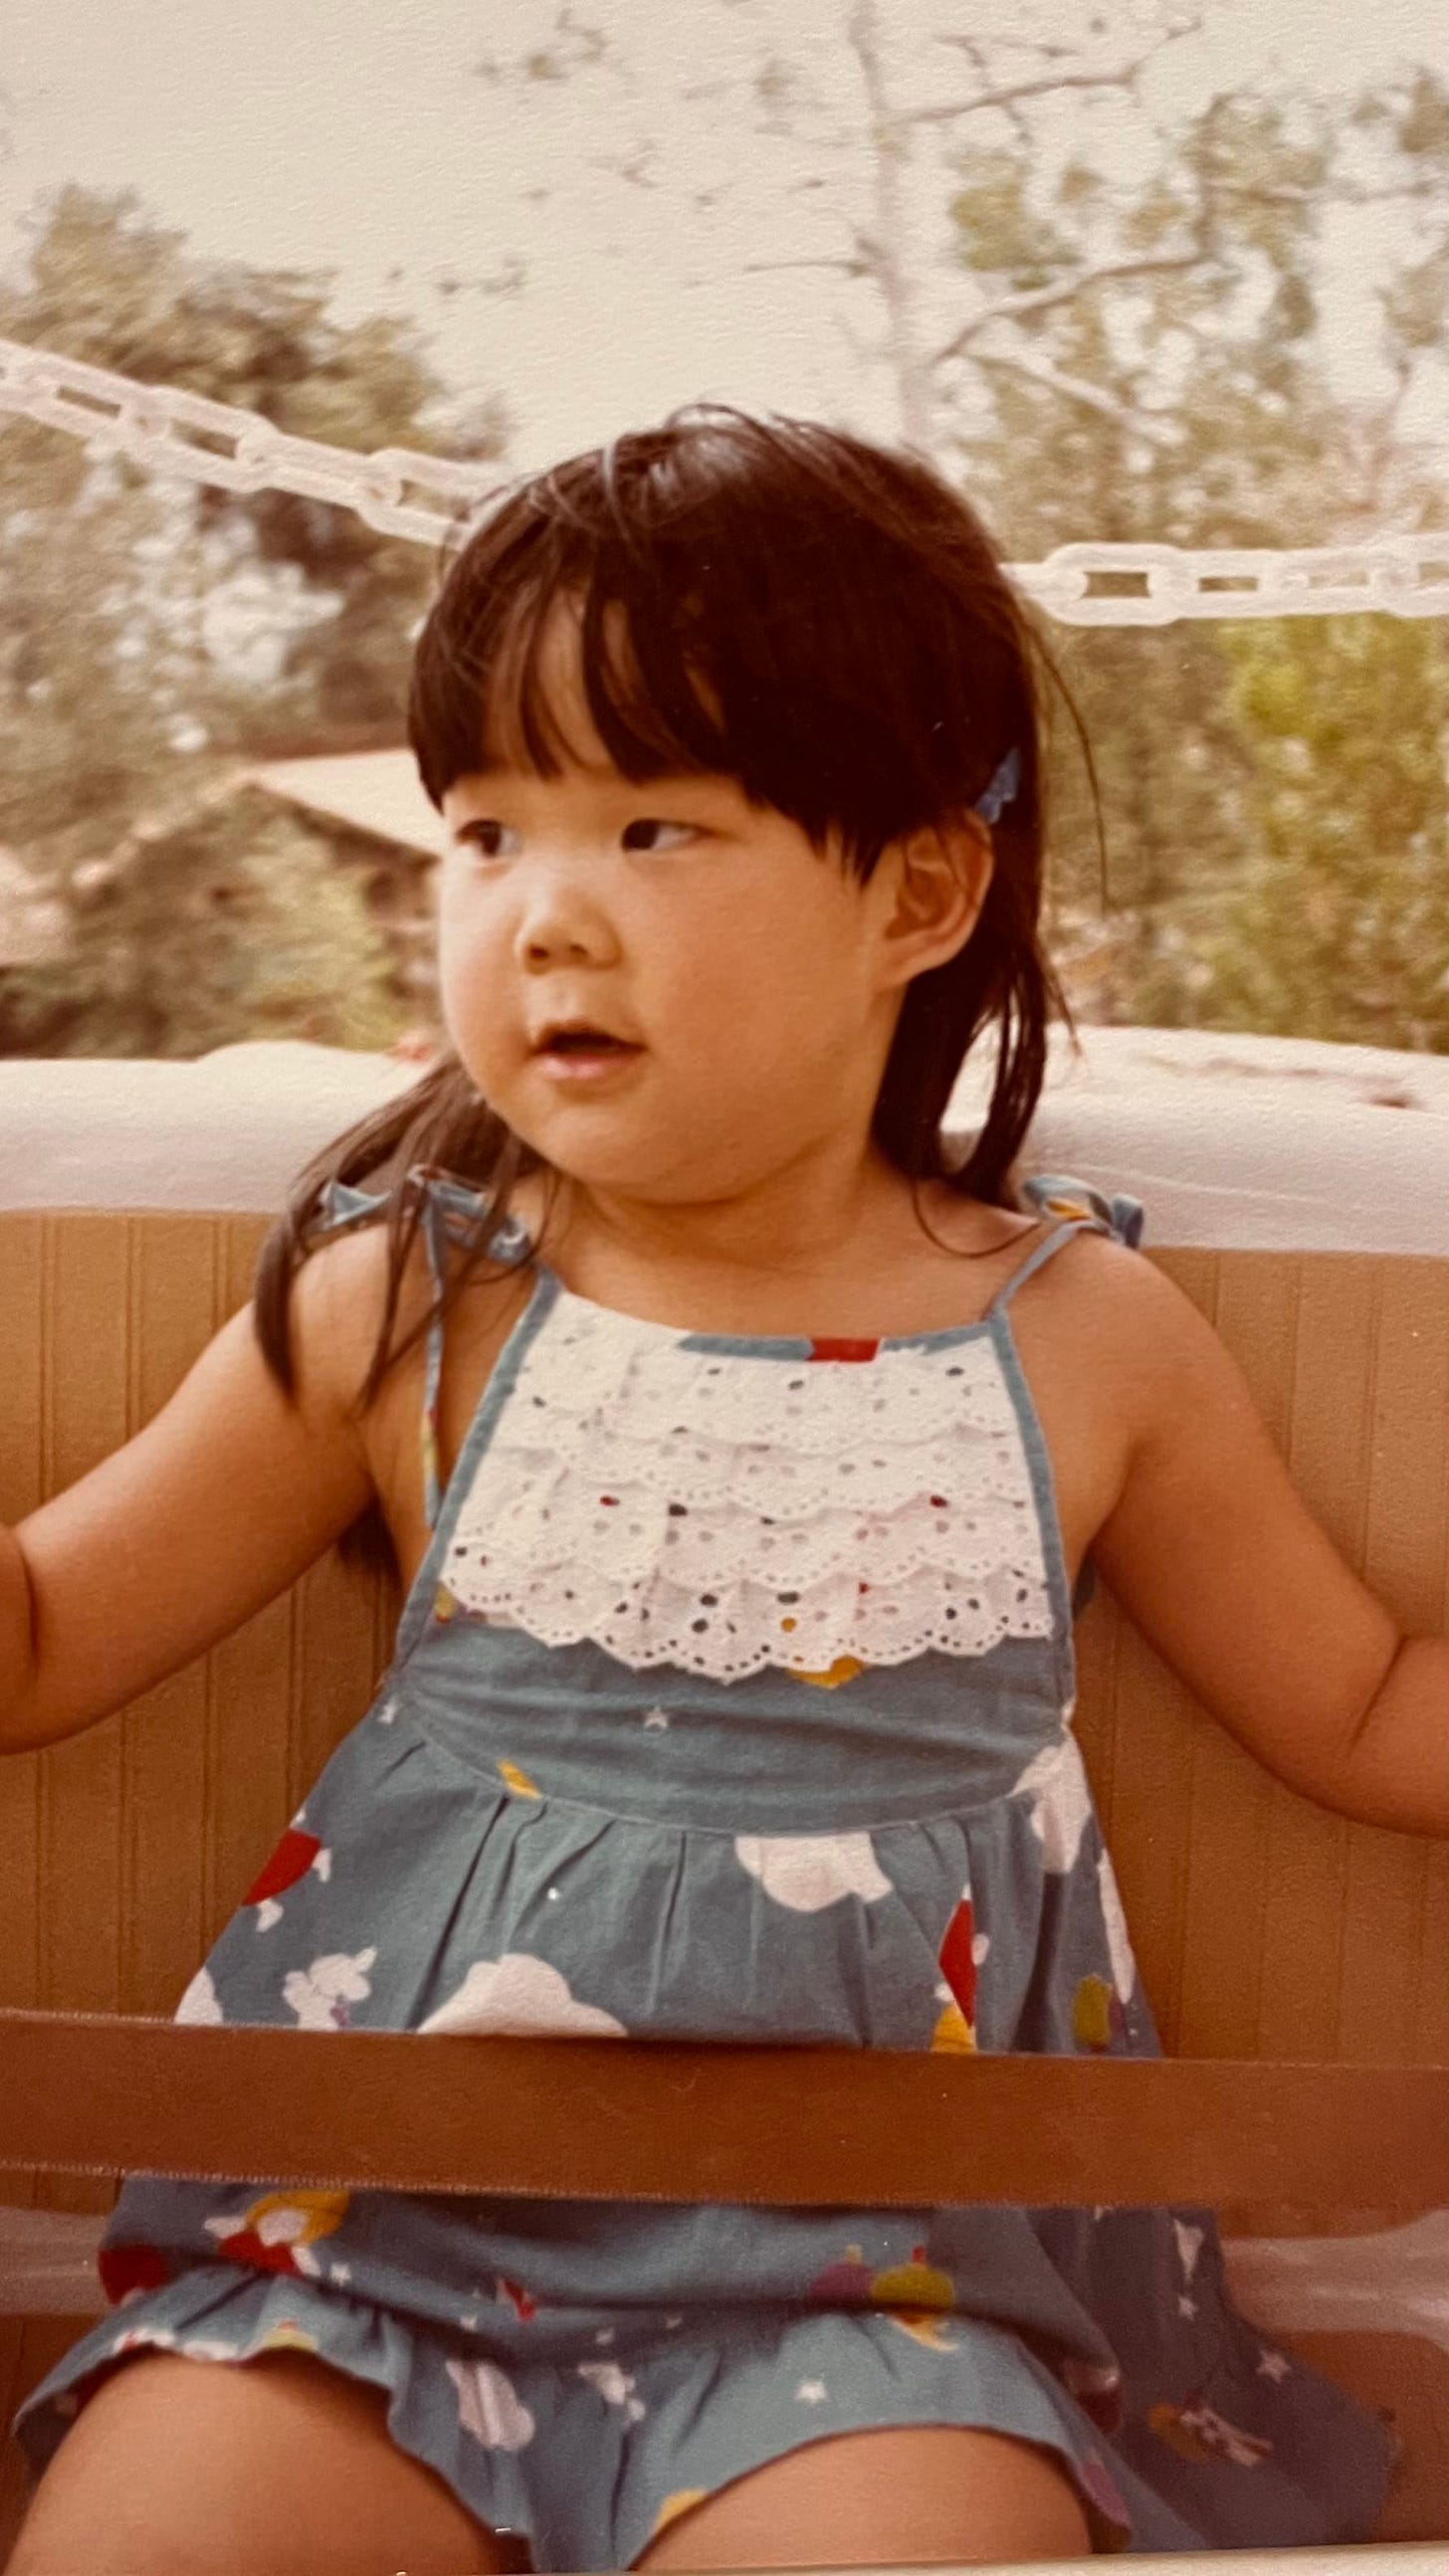 Author Evelyn Skye as a toddler